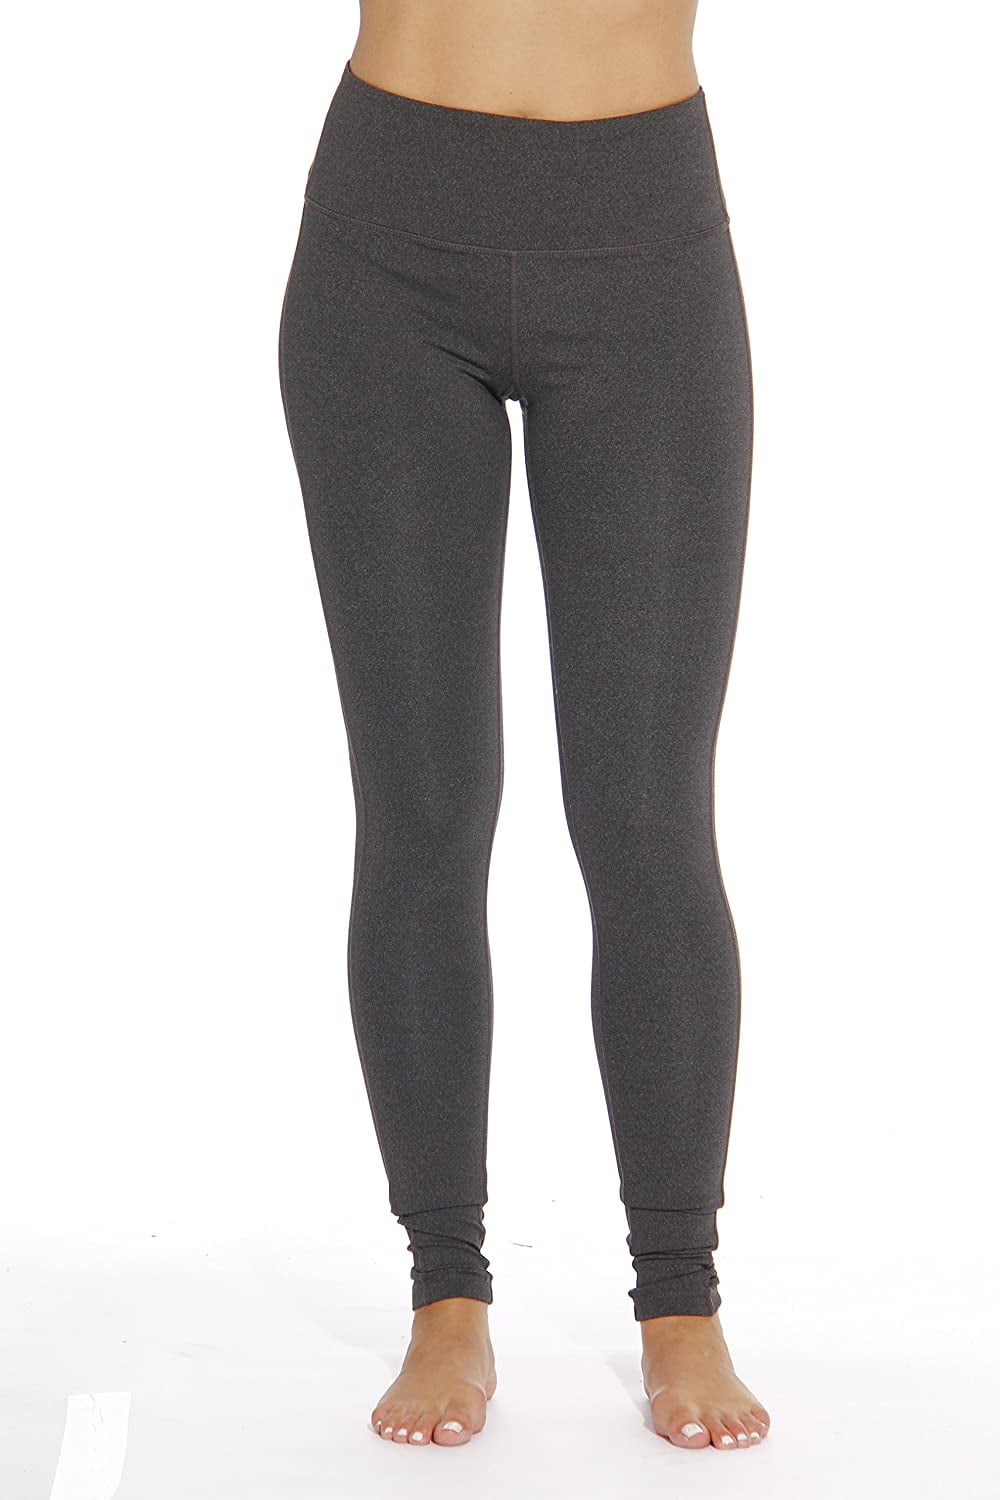 Just Love Stretch Yoga Pants for Women with Hidden Pocket 